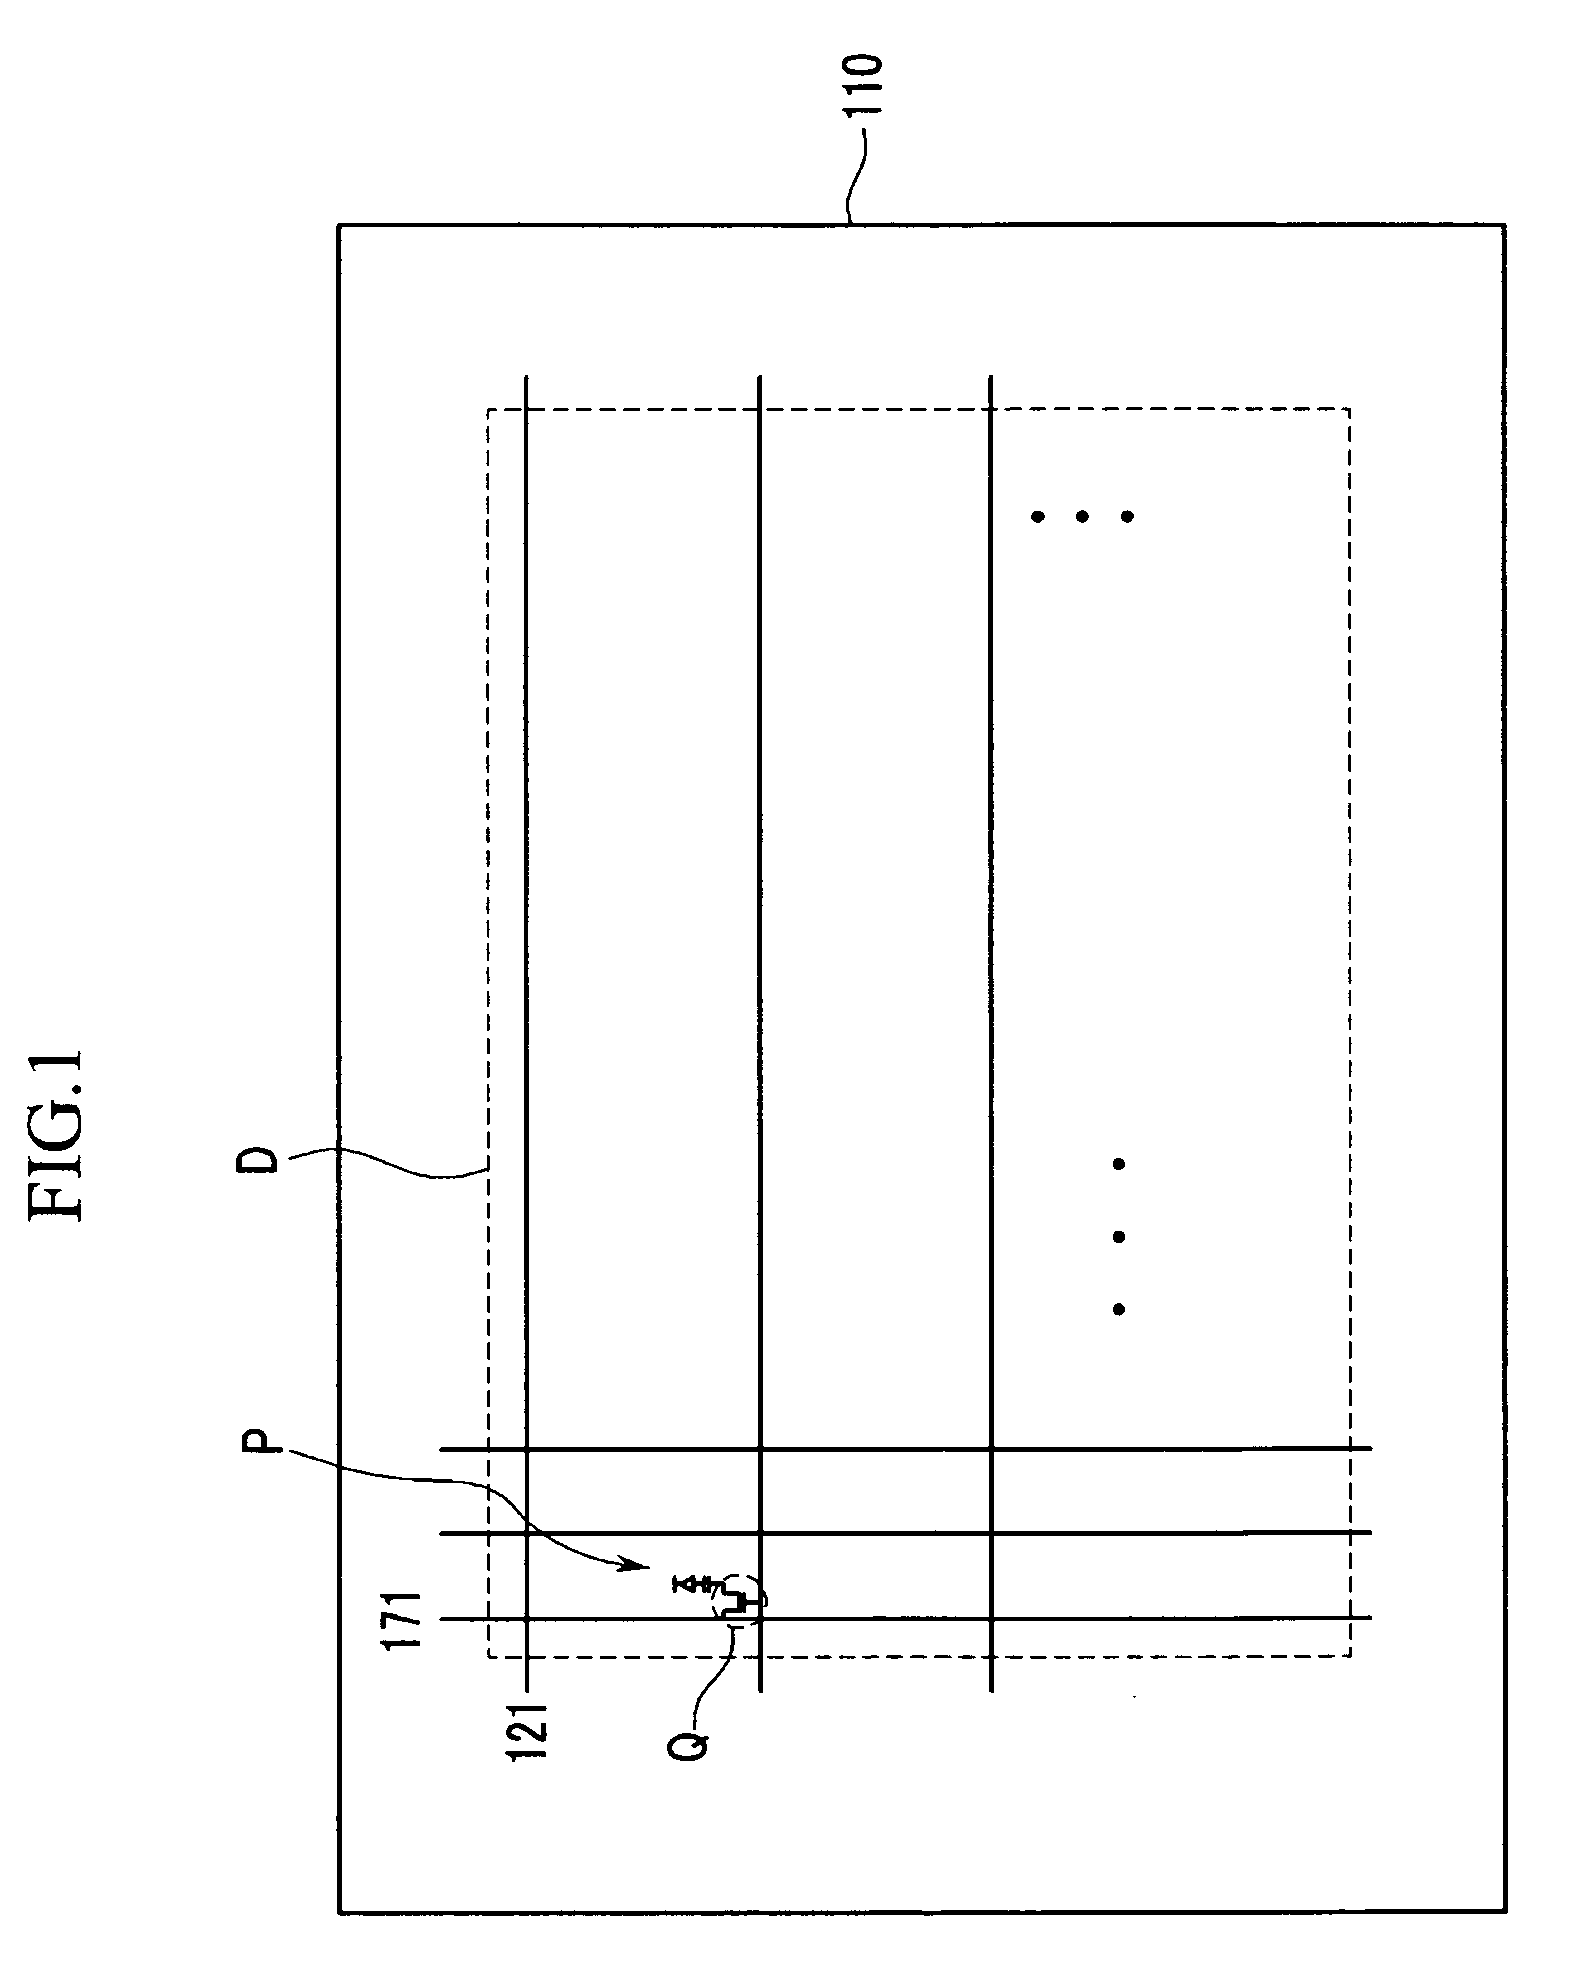 Thin film transistor (TFT) array panel with TFTs having varying leakage currents